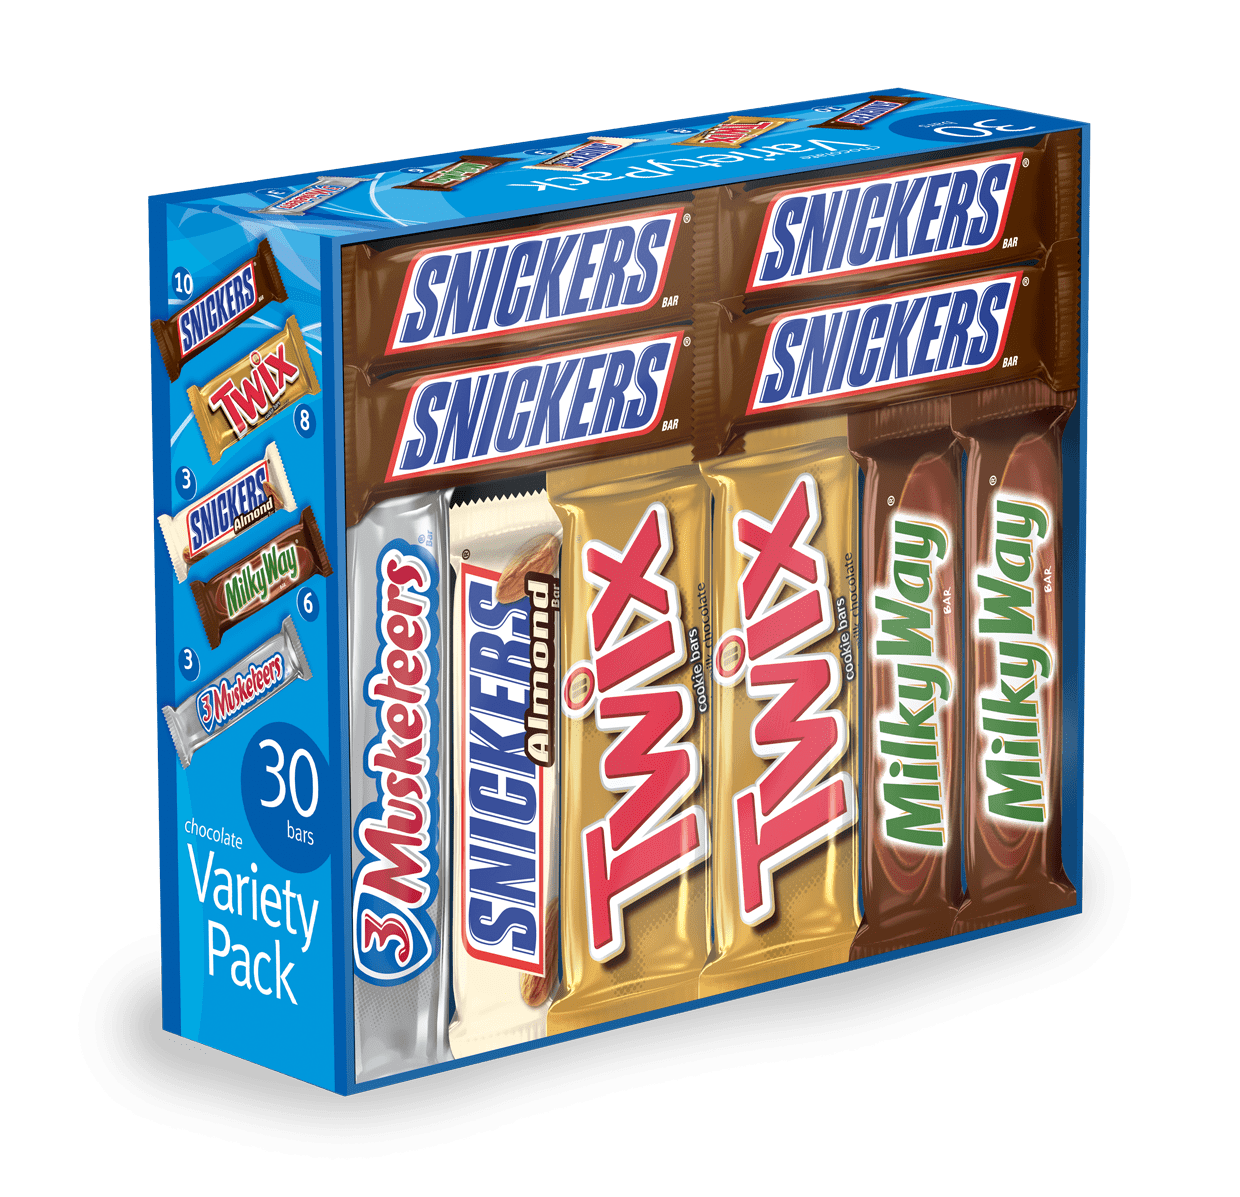 MARS Chocolate Full Size Candy Bars Assorted Variety Box (TWIX, MILKY WAY,  SNICKERS, SNICKERS Almond, & 3 MUSKETEERS Brands), 55 oz 30 Pieces -  